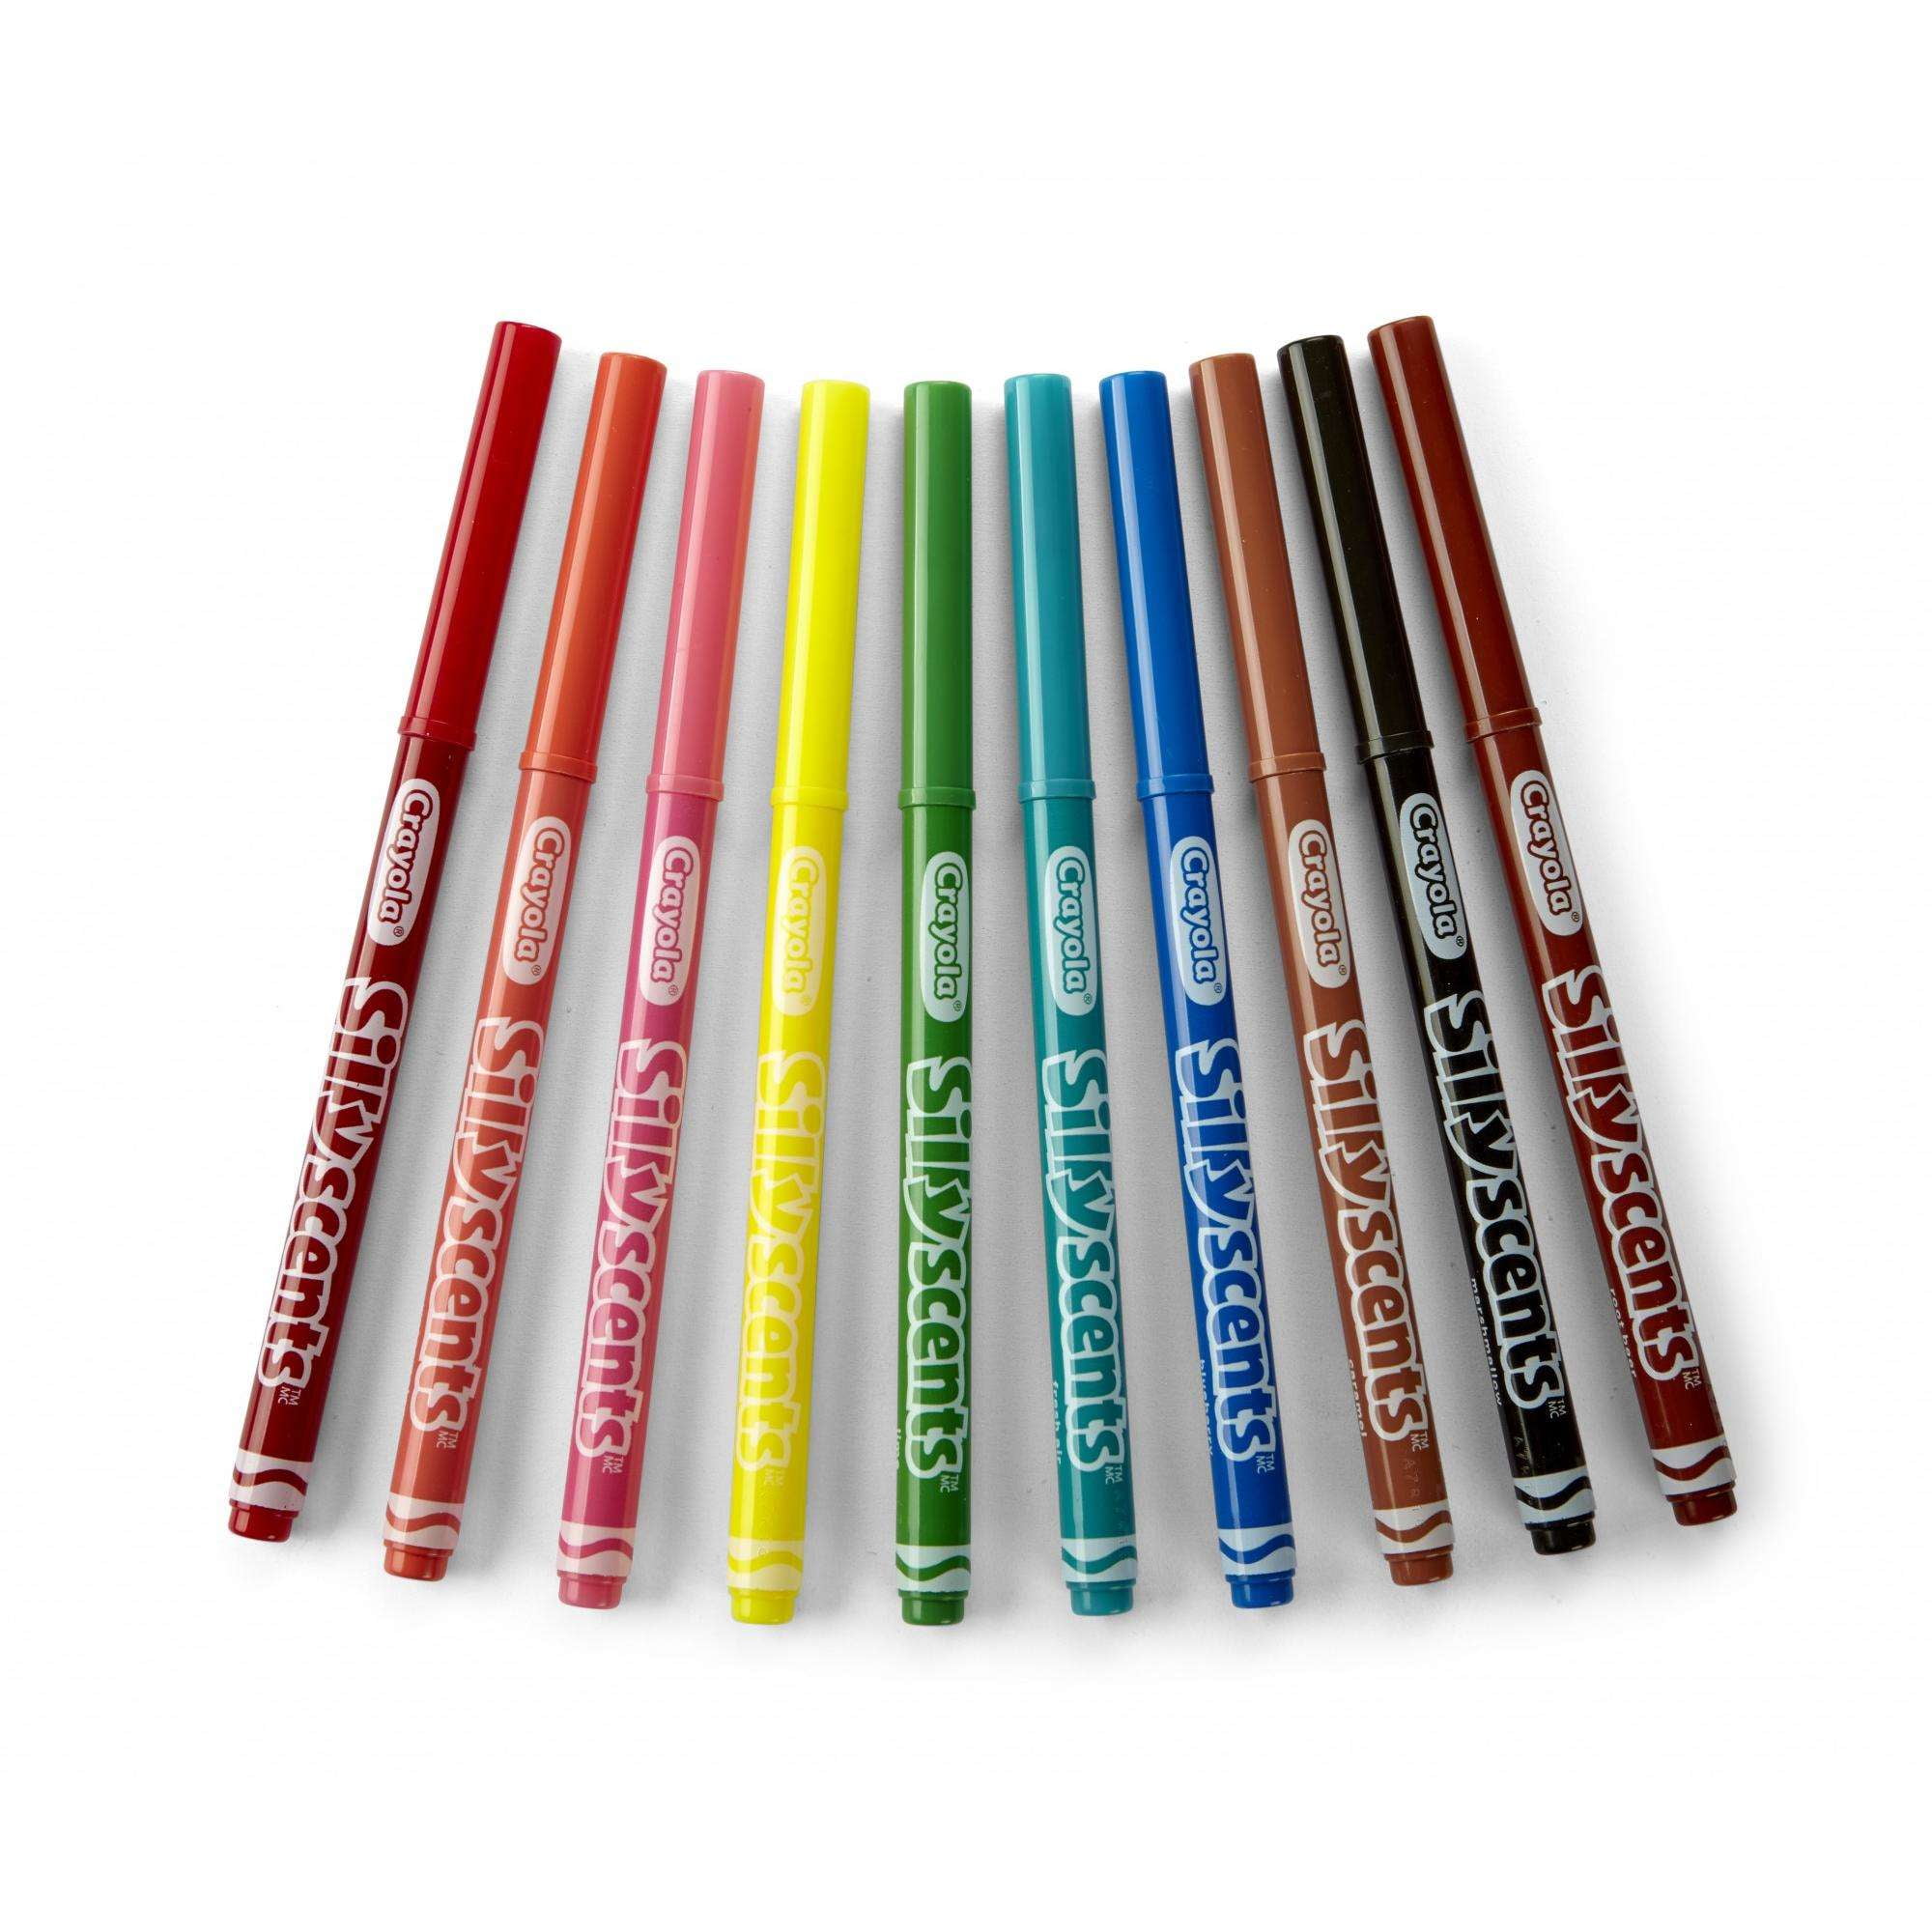 CRAYOLA STINKS! Smelling Crayola Silly Scents Markers 